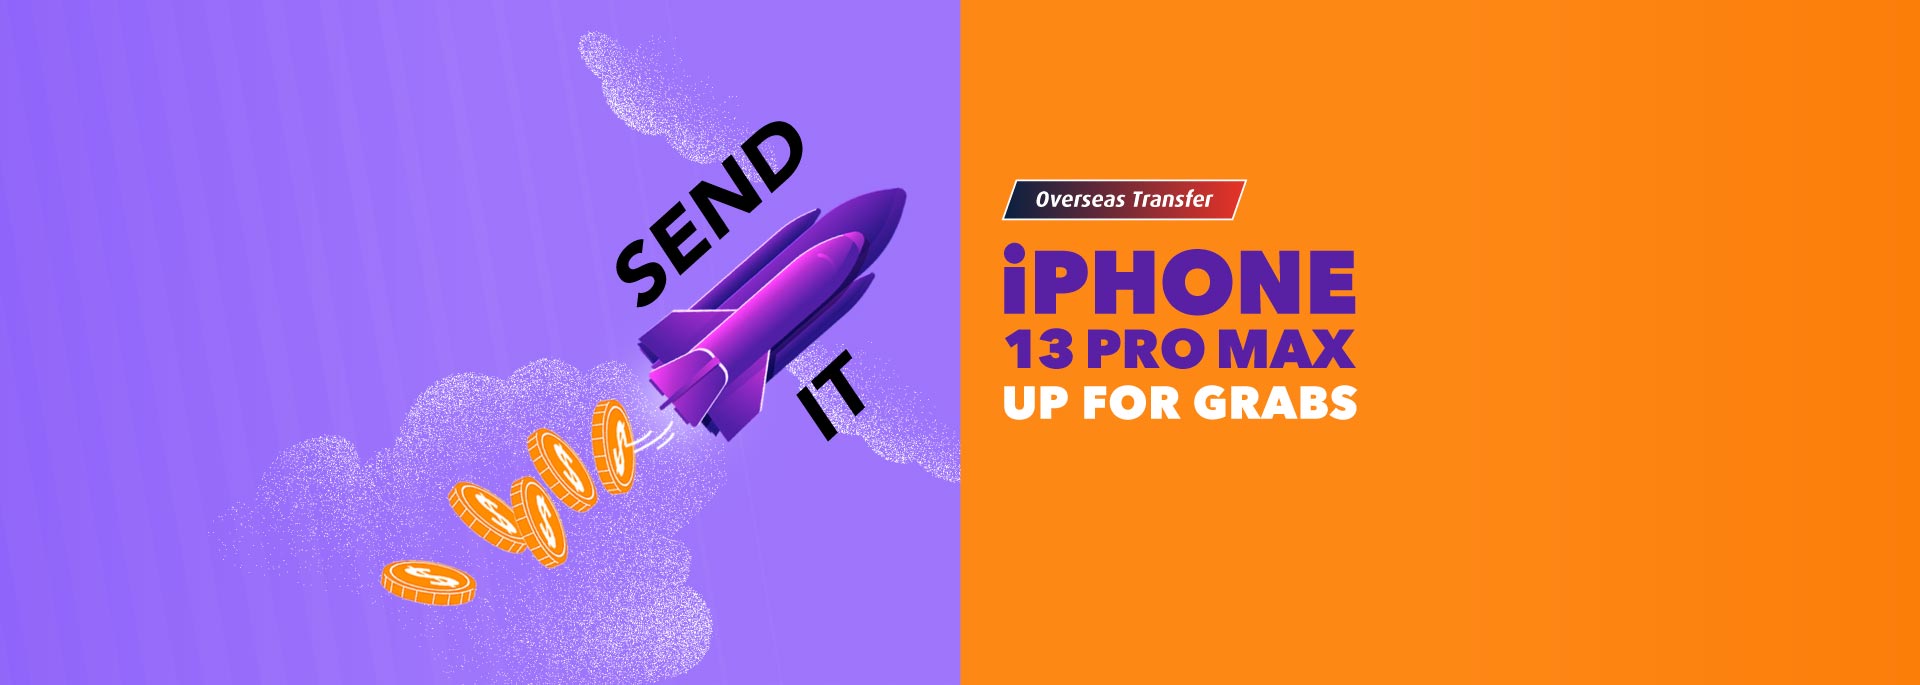 Send money overseas and stand to win an iPhone 13 Pro Max